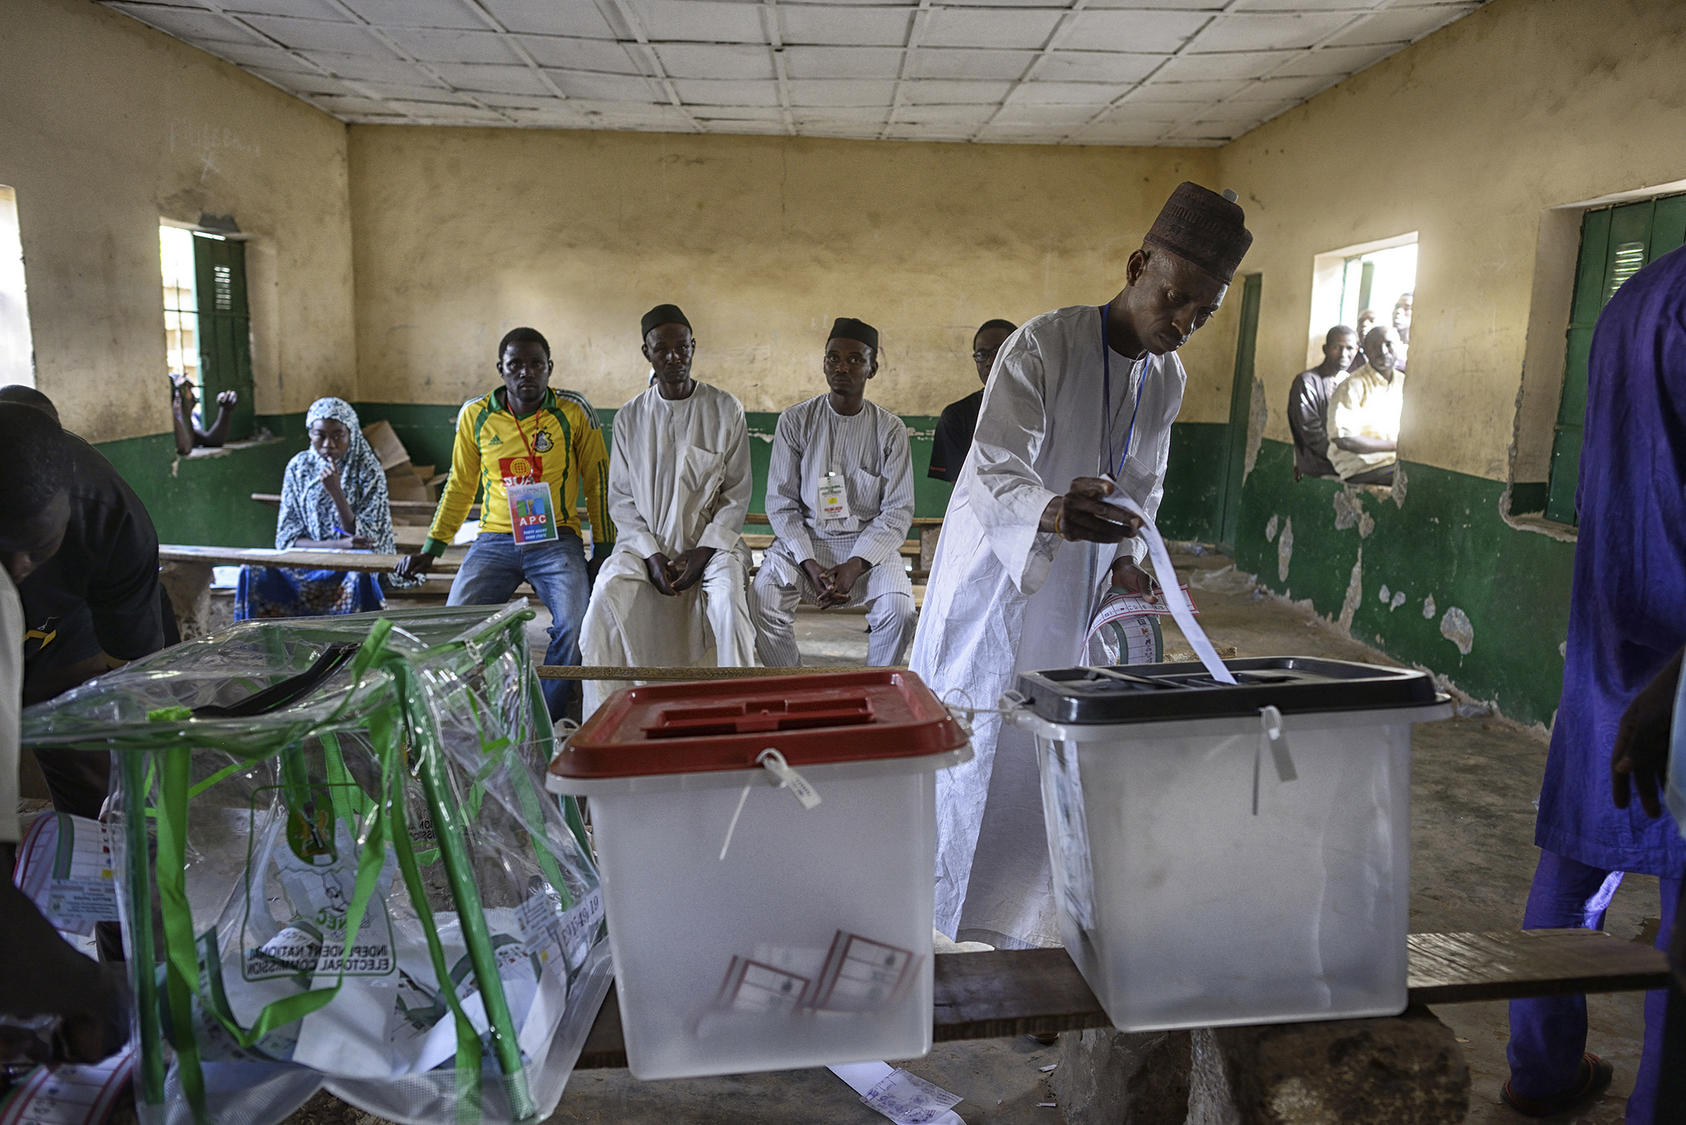 A man votes at a polling station in Kano, Nigeria, March 28, 2015. (Samuel Aranda/The New York Times)